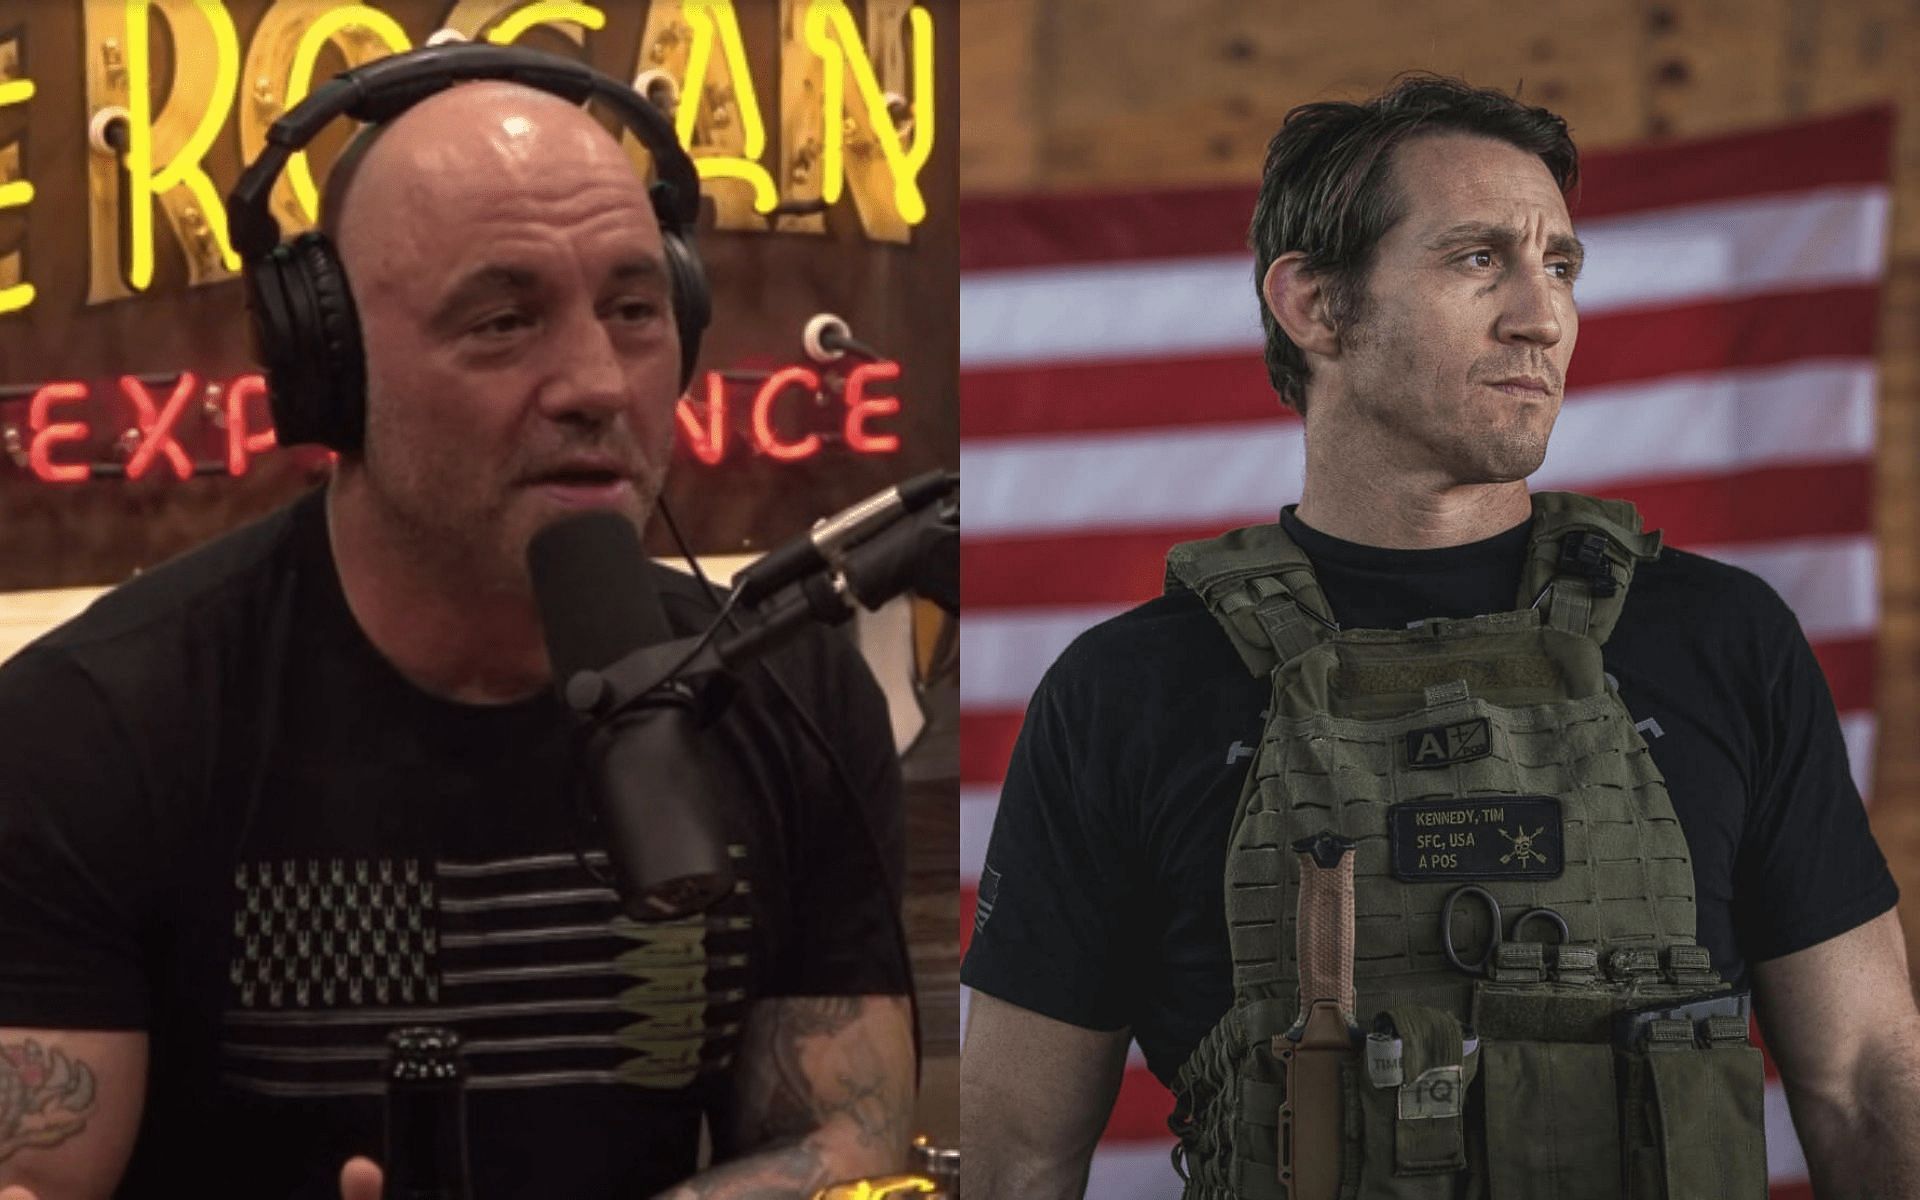 Tim Kennedy speaks about his Afghanistan experience with Joe Rogan